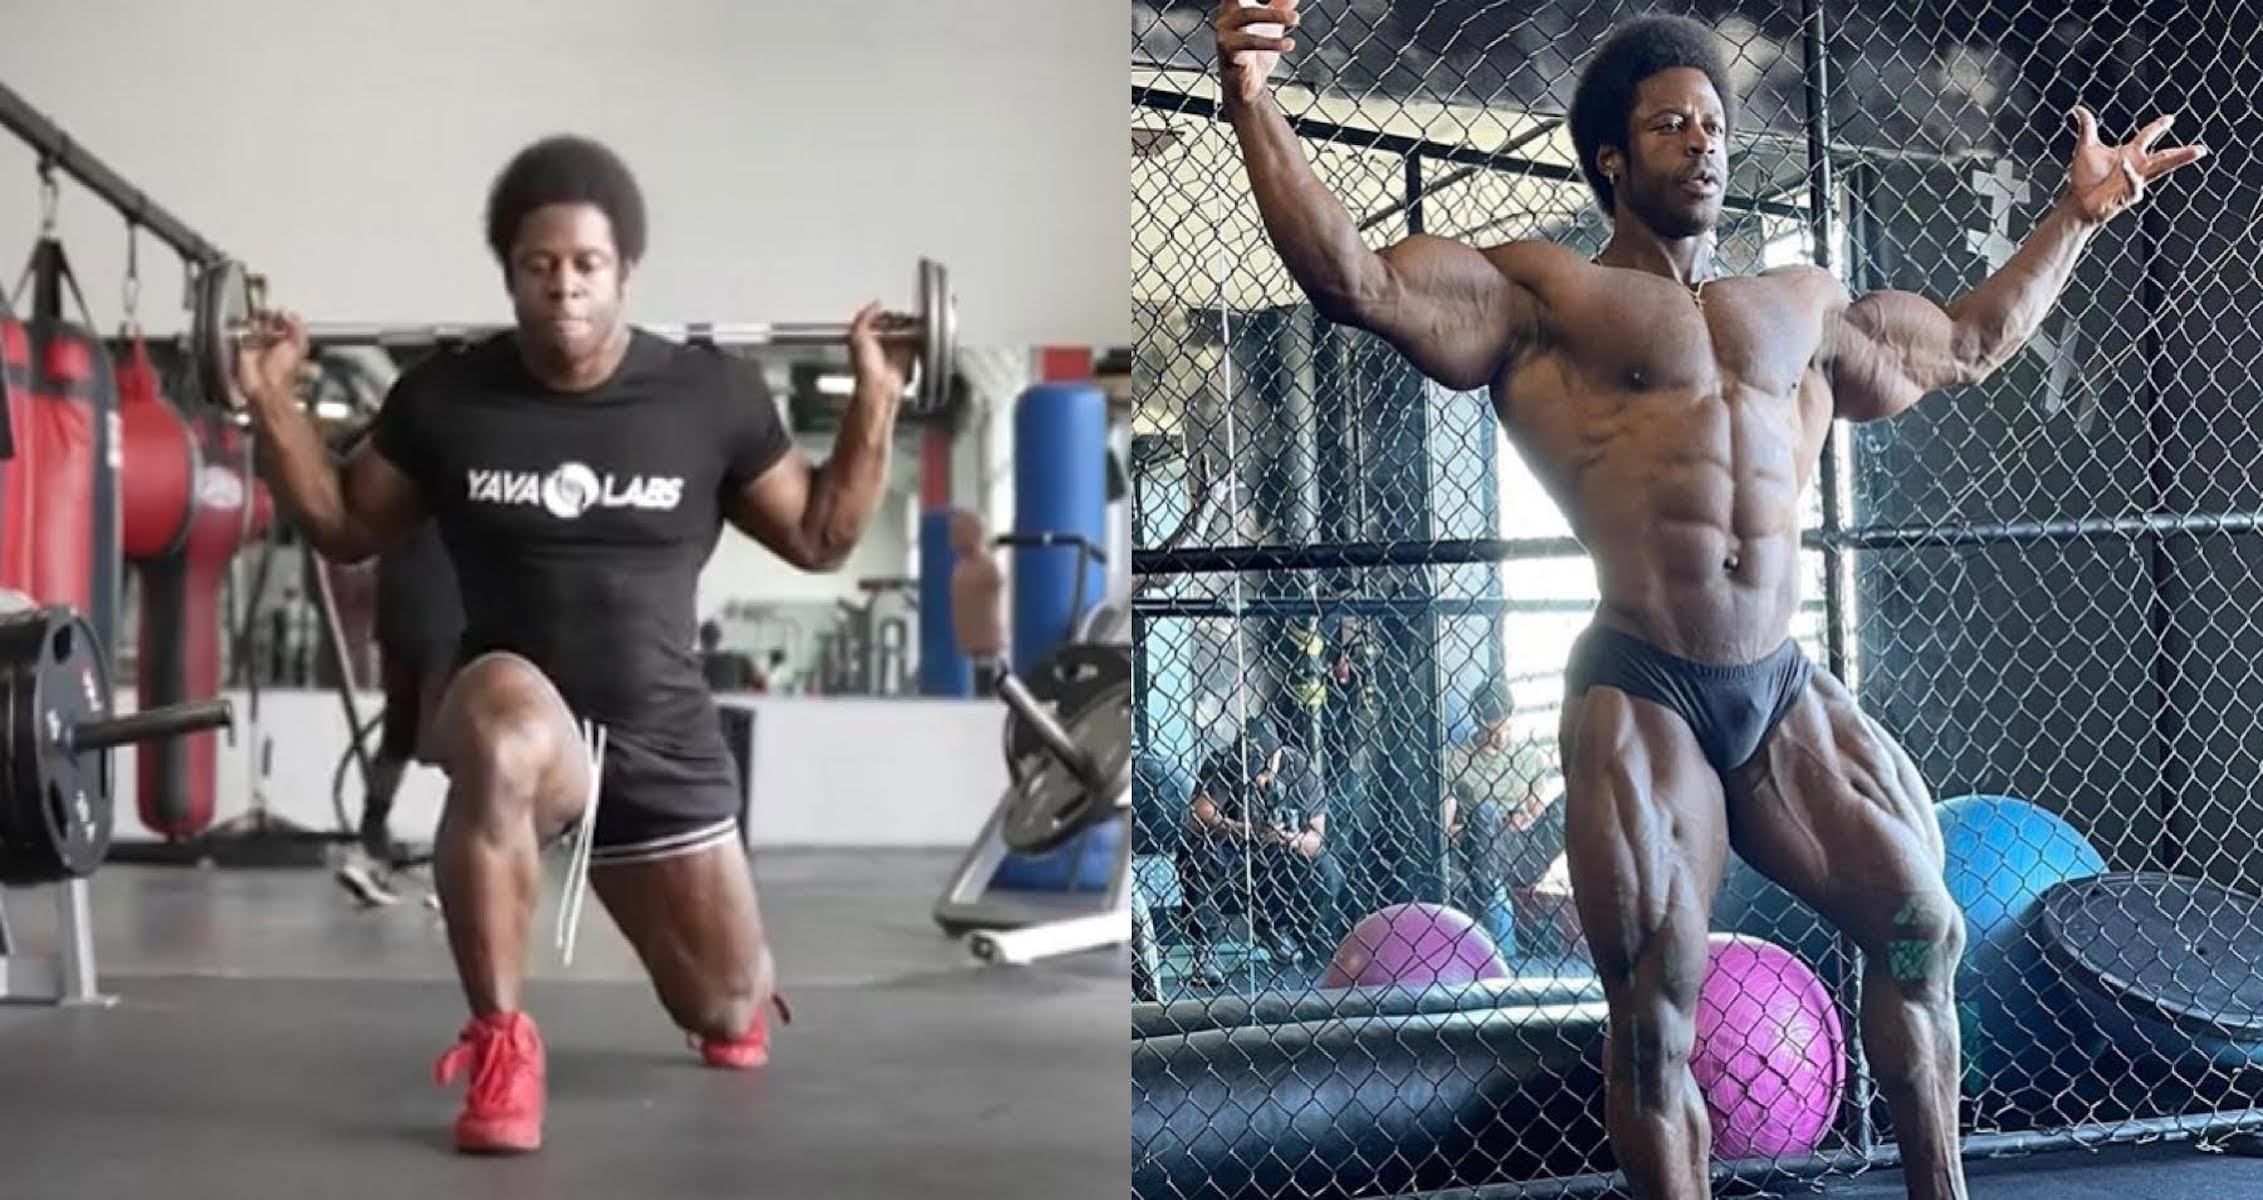 Breon Ansley Shares Massive Leg Workout, Plans To Compete At 2022 Tampa Pro